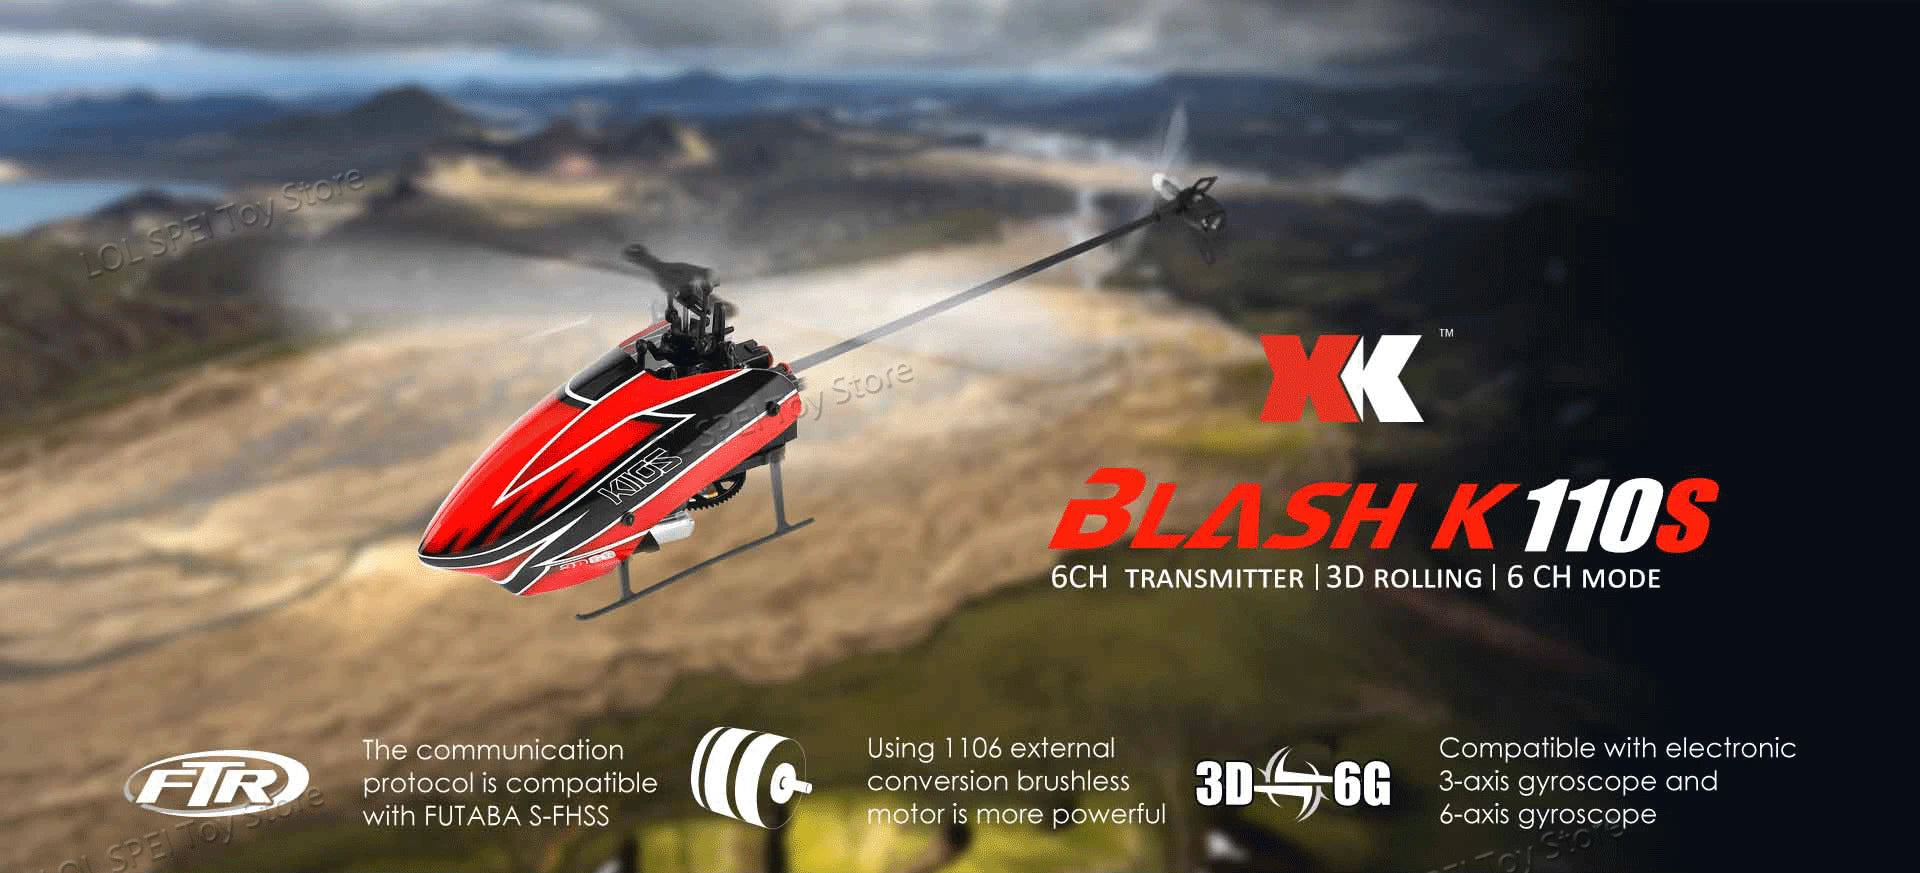 Wltoys XK K110s RC Helicopter, Compatible with electronic FR protocol is compatible conversion brushless 30-( 6G 3-axis 